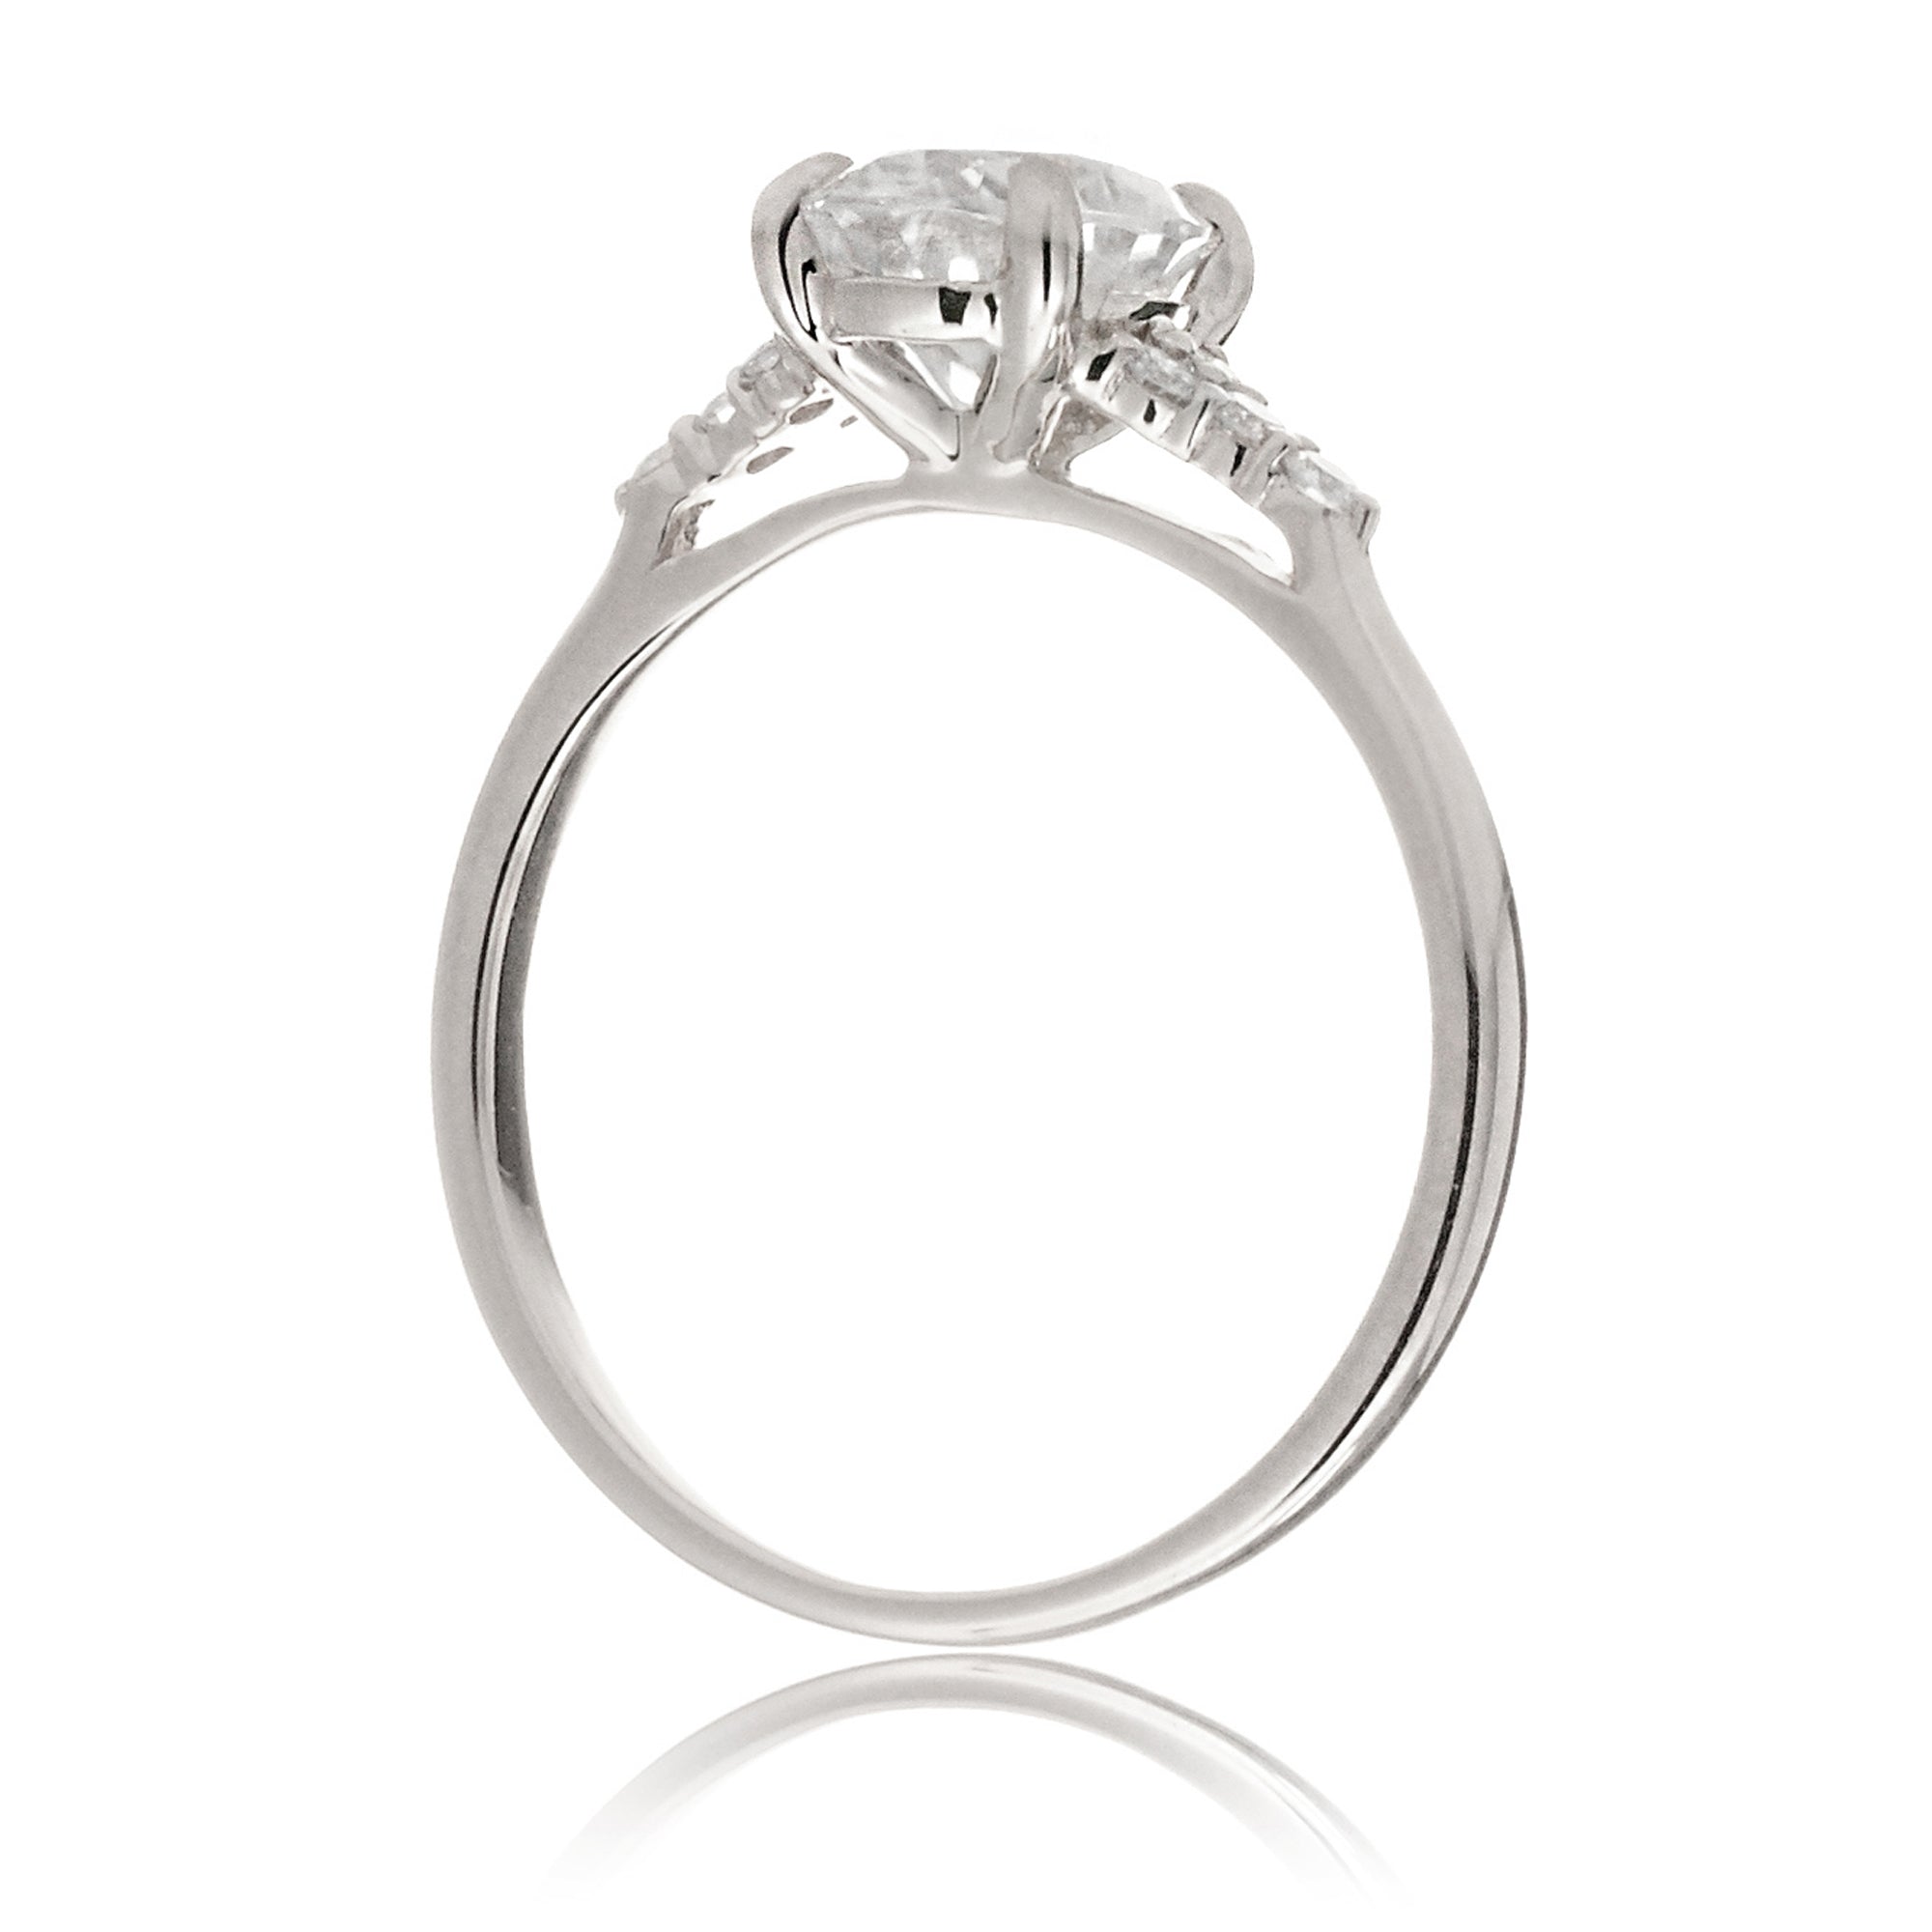 Oval moissanite ring in white gold with side diamonds lab-grown - the Chloe ring